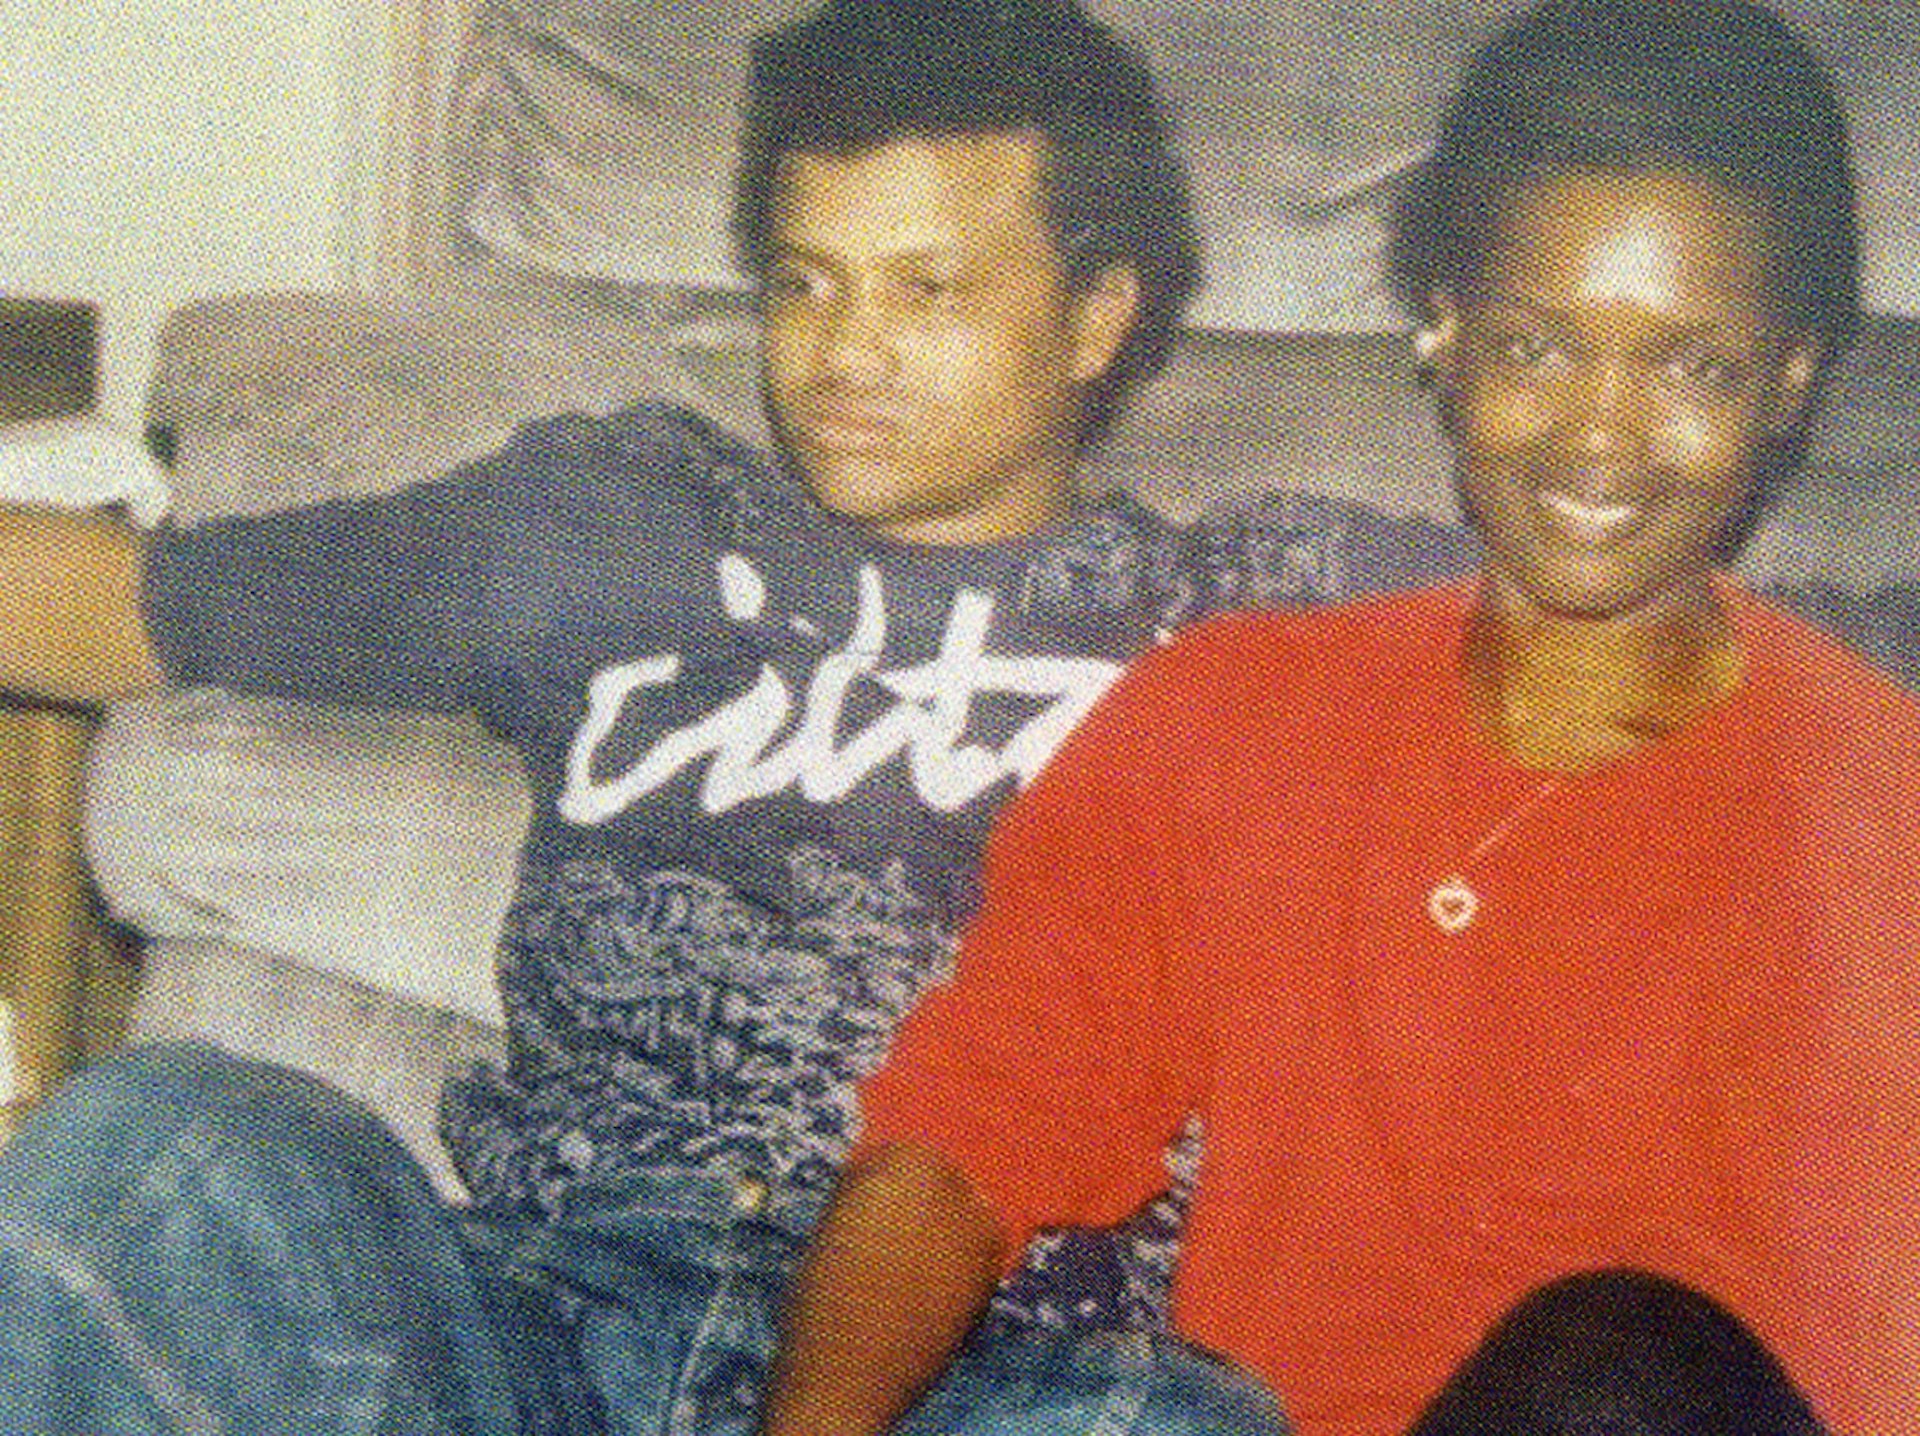 A young Andre Butler sits with a young woman, leaning against a couch.